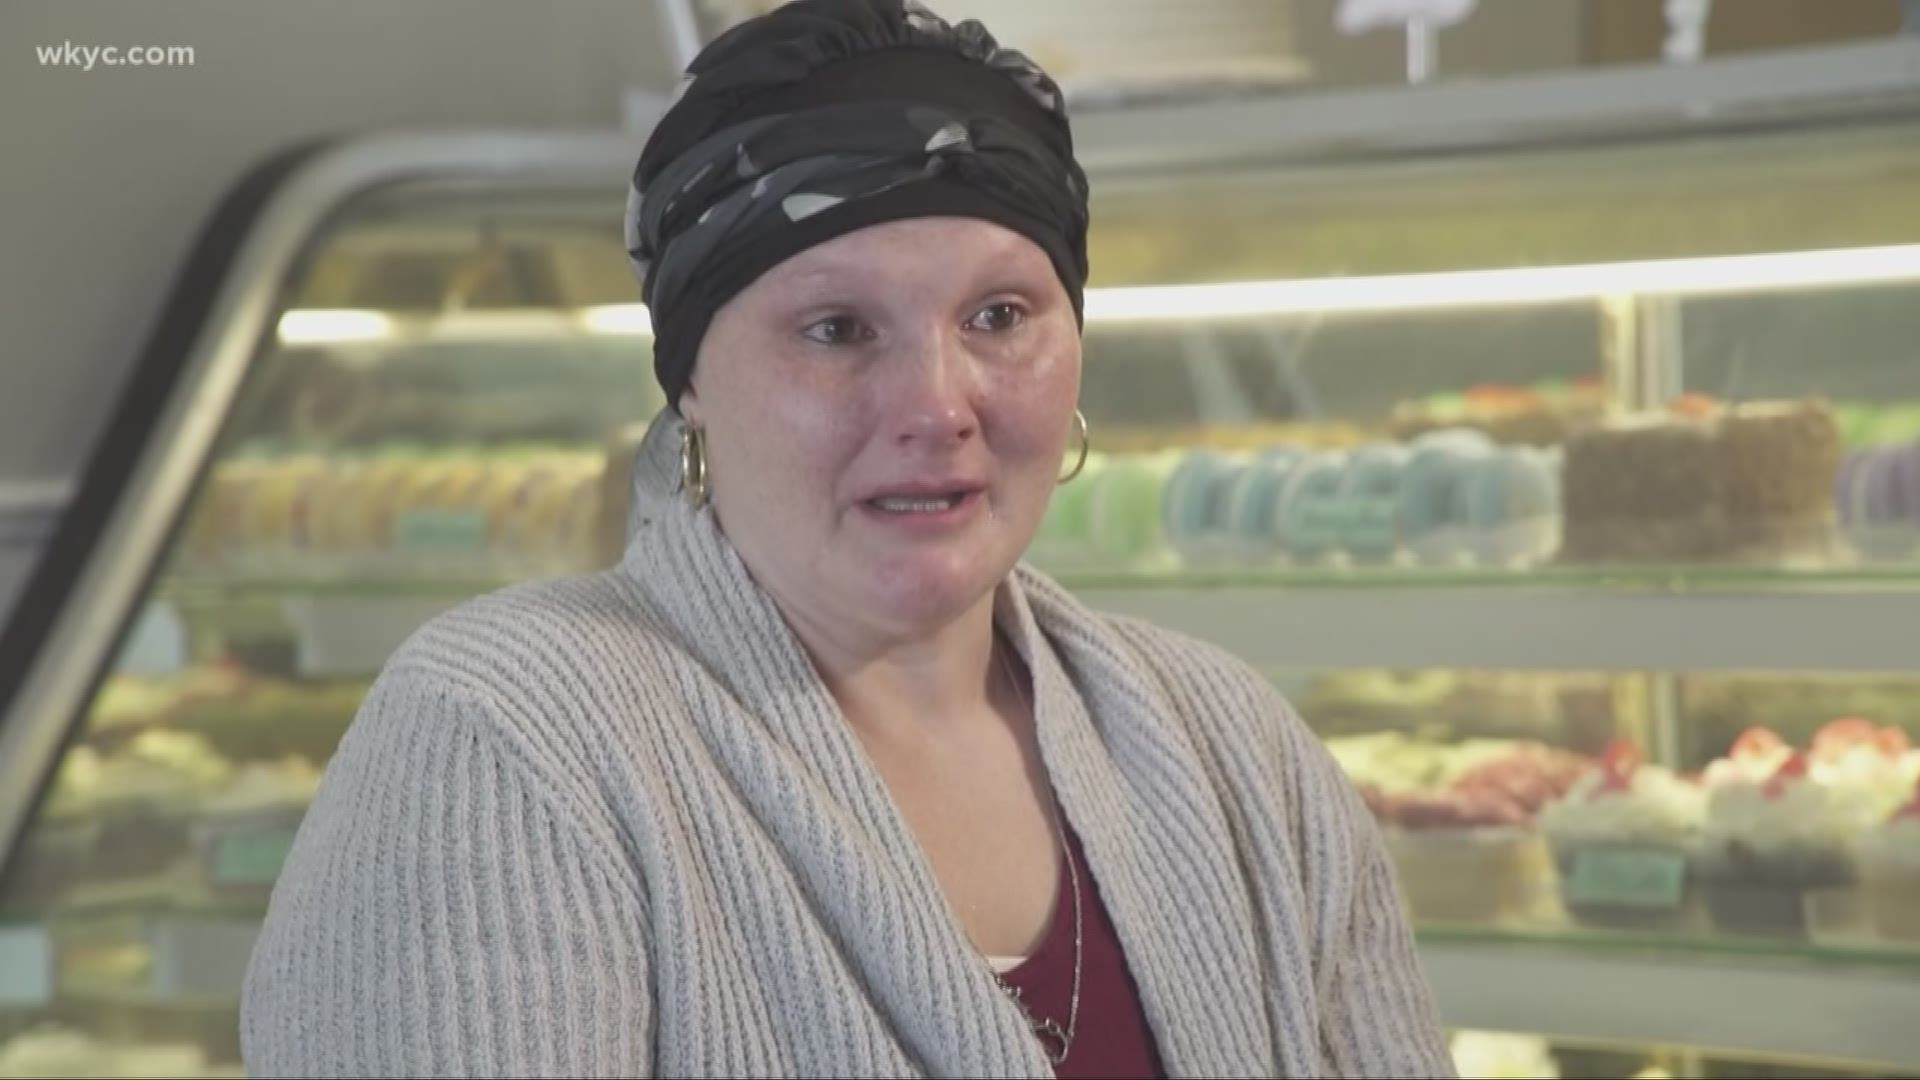 Patty Yon is in the fight of her life. But a local business has stepped up to help, donating half the proceeds to a treat in her name.